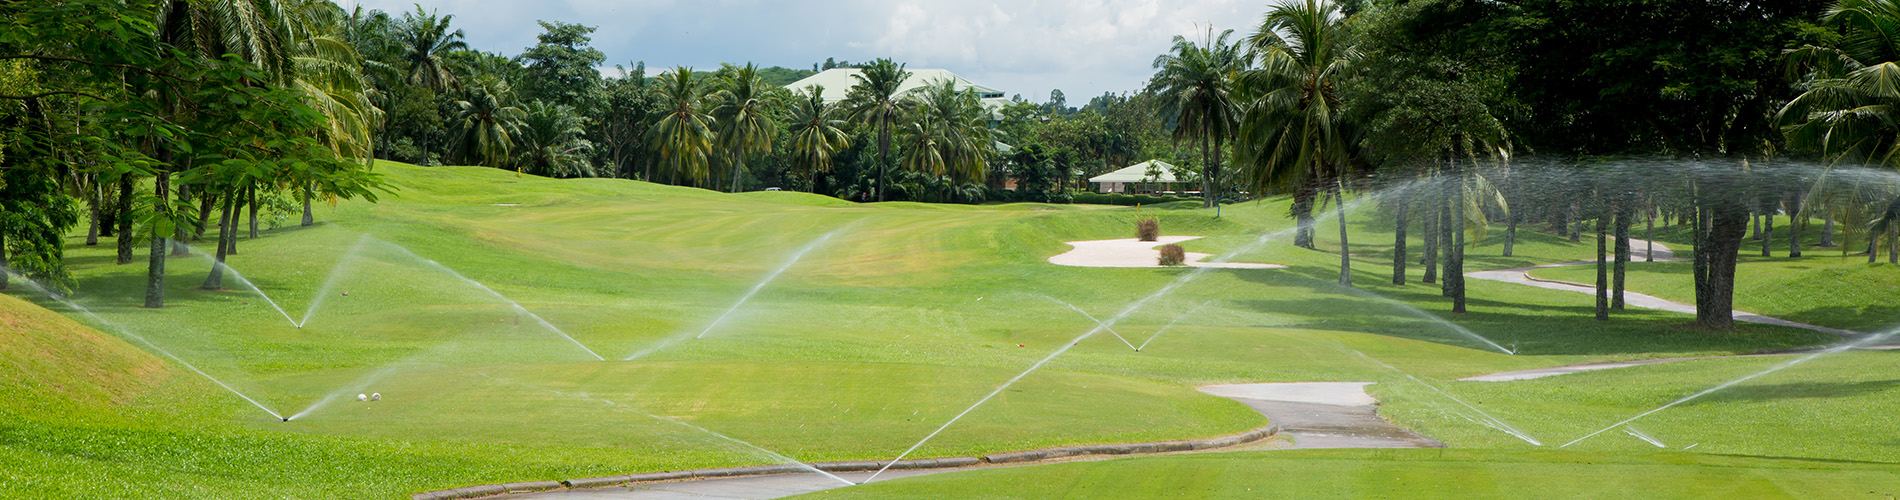 golf course turf field with irrigation